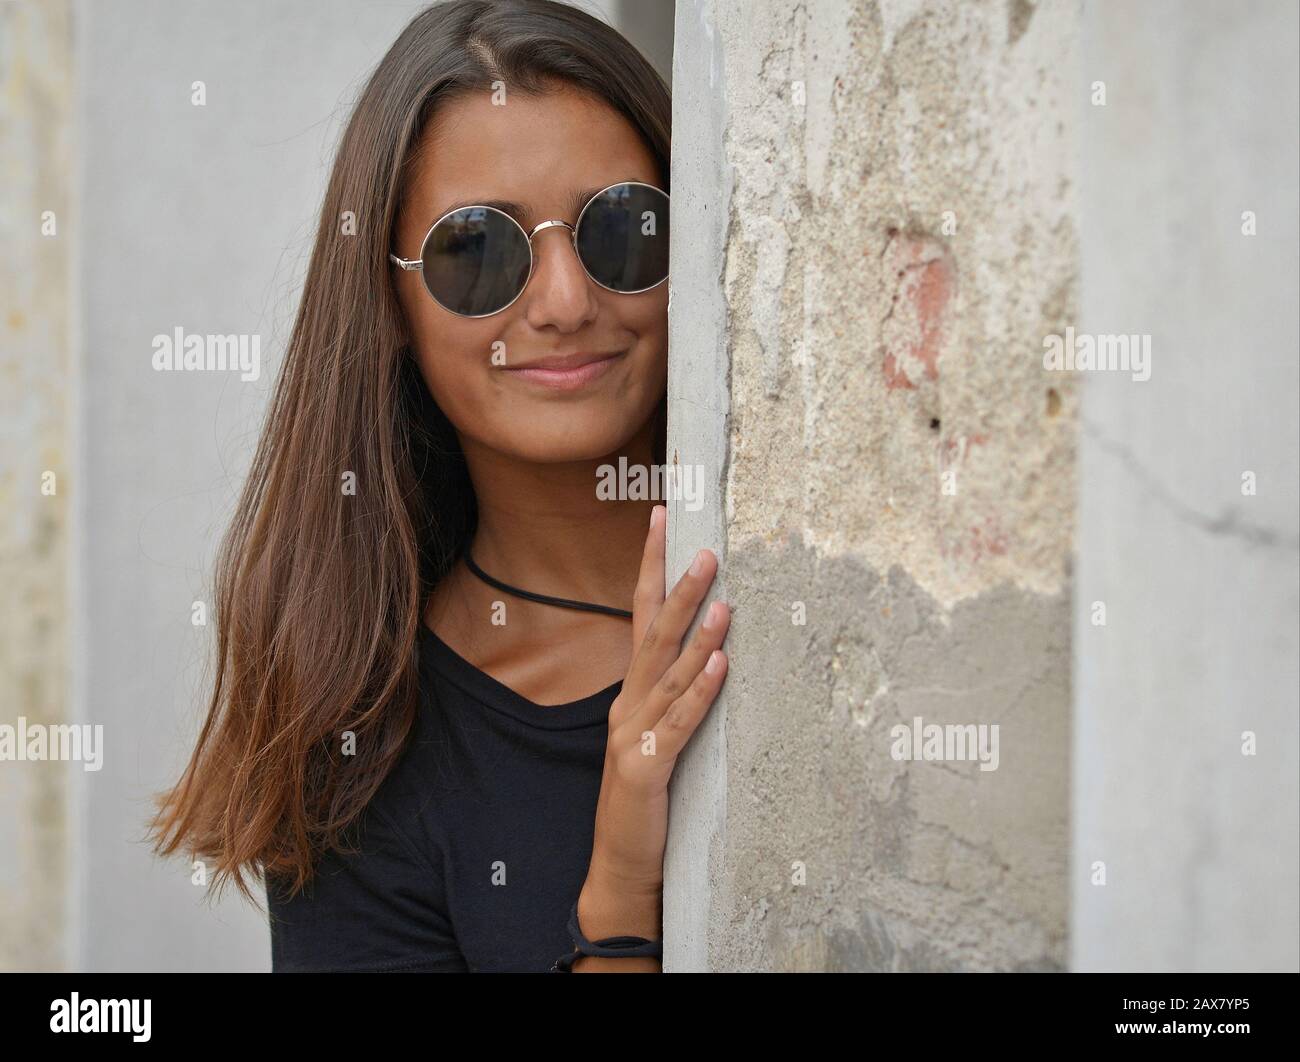 Young woman with beautiful hair and sunglasses looks around the corner of an old house. Stock Photo